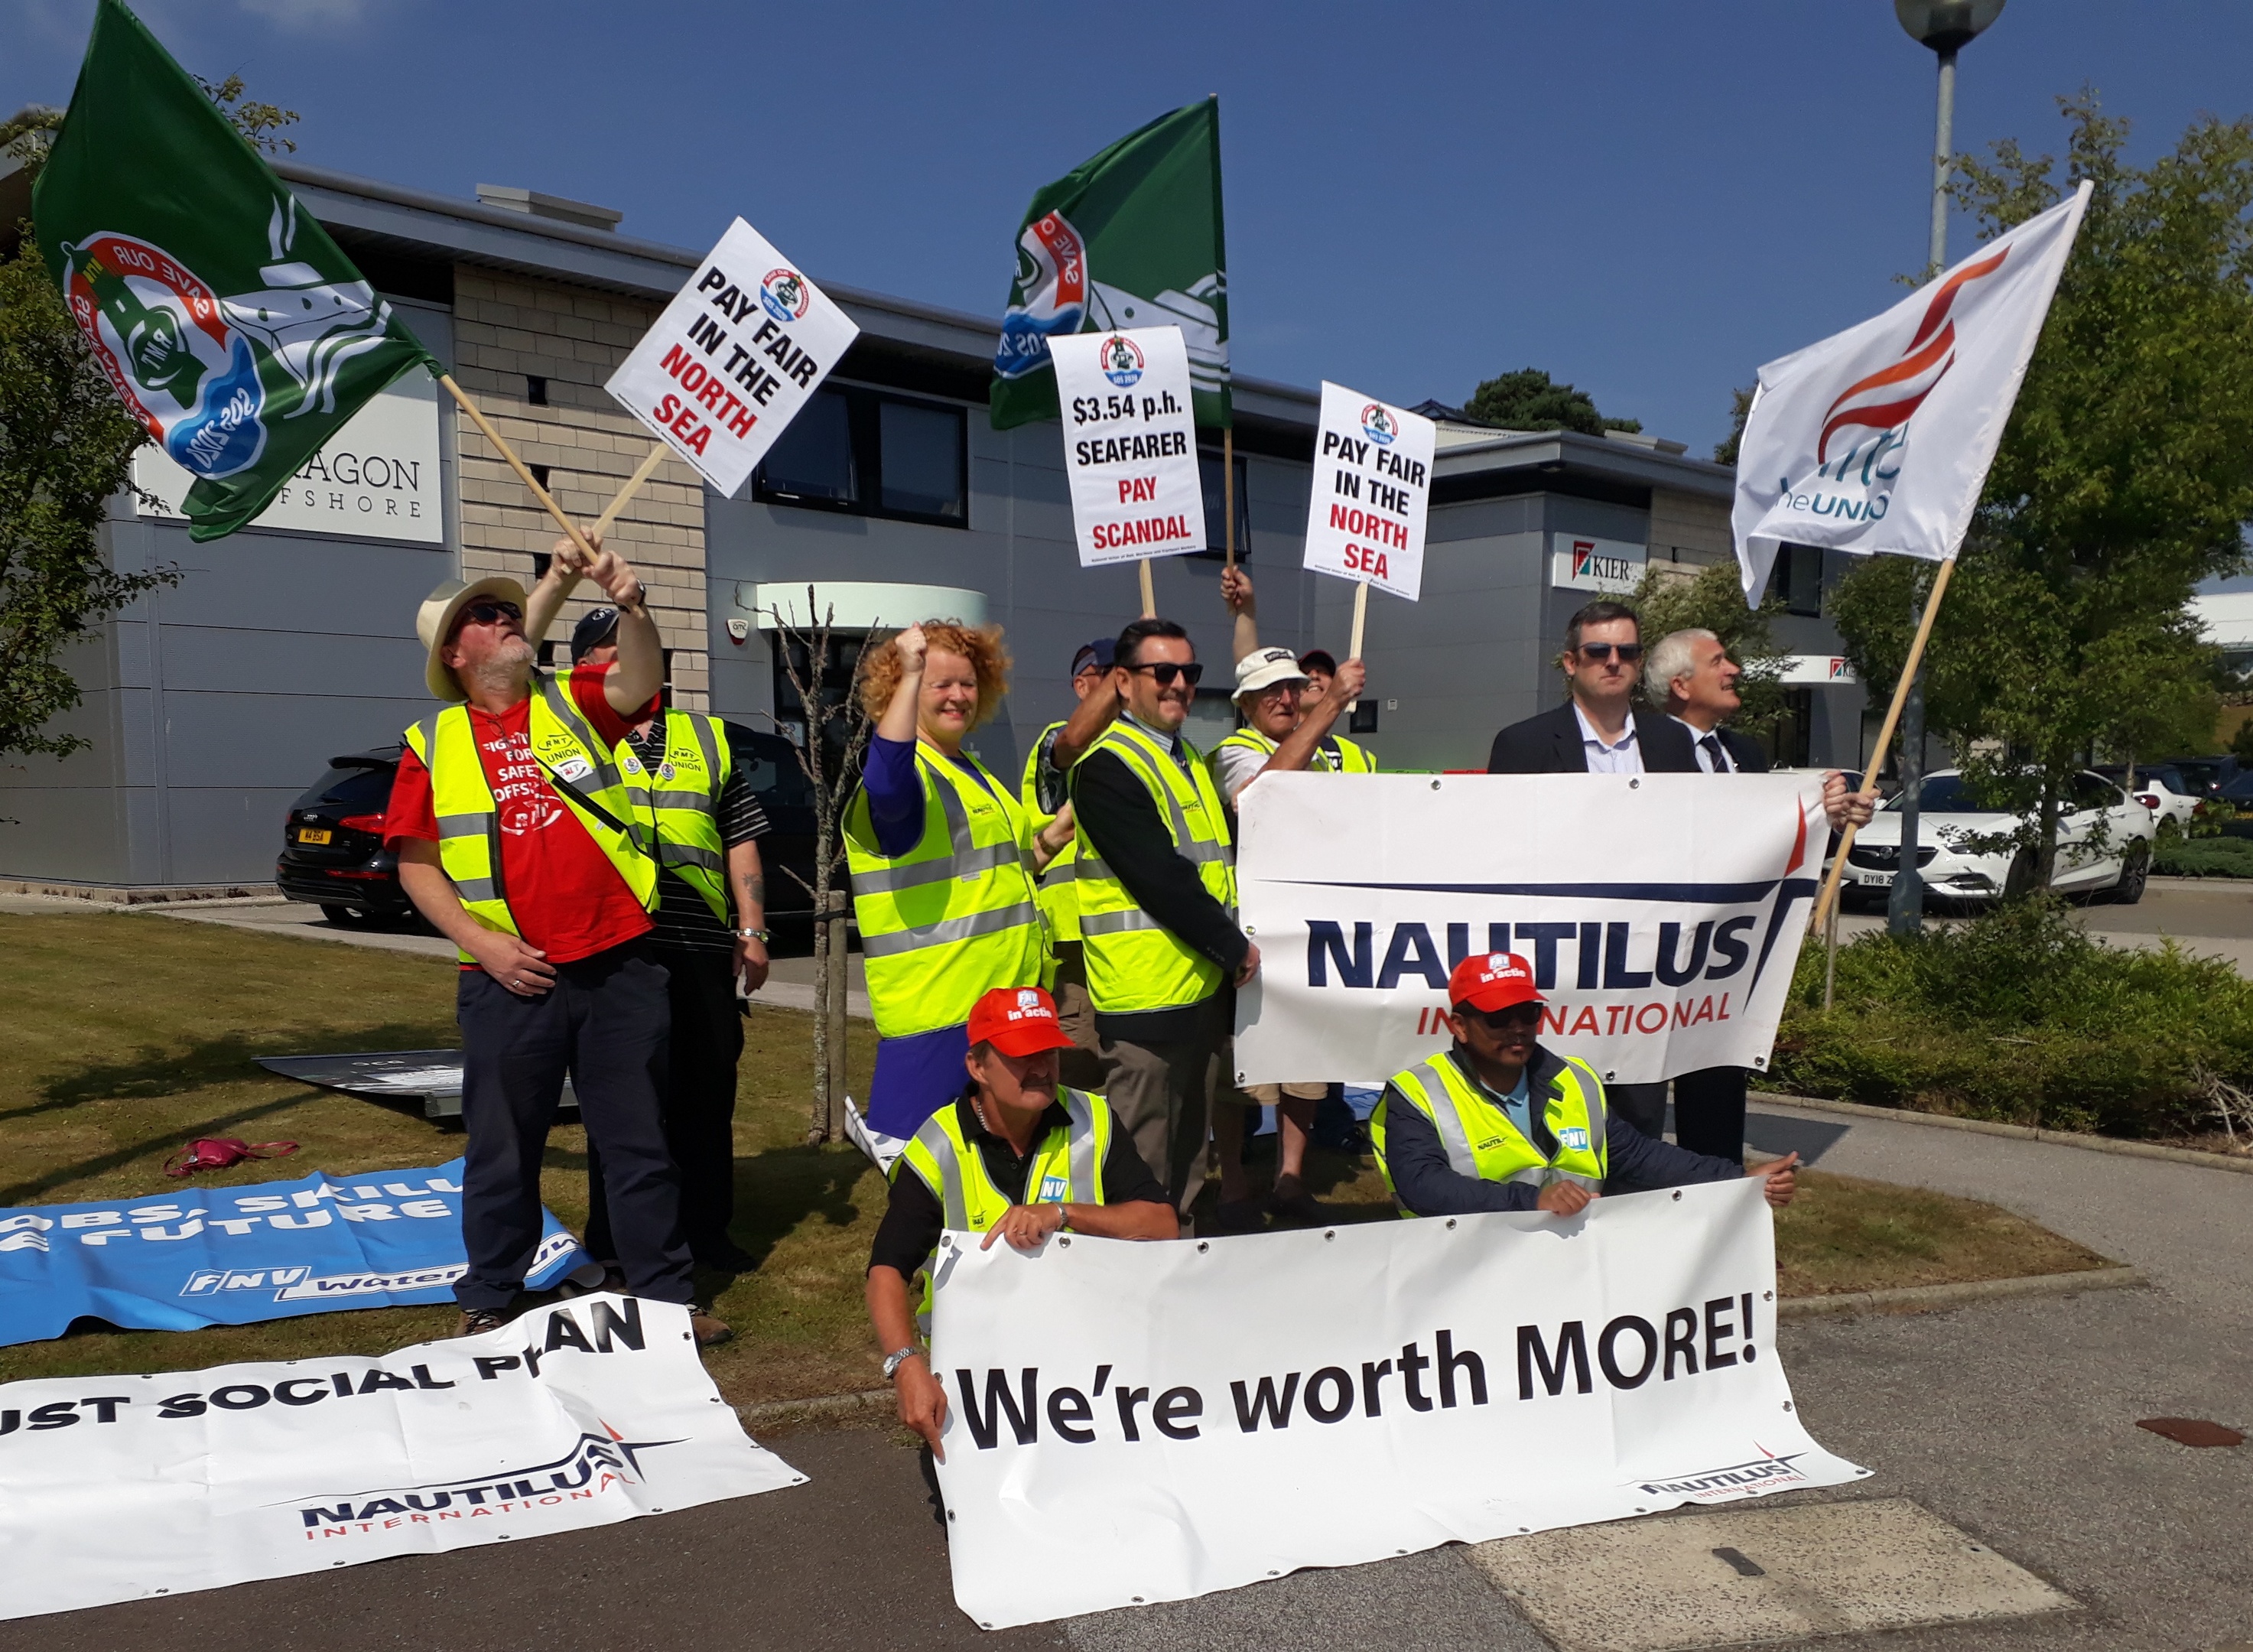 Borr Drilling protest by Nautilus, RMT and Unite unions.